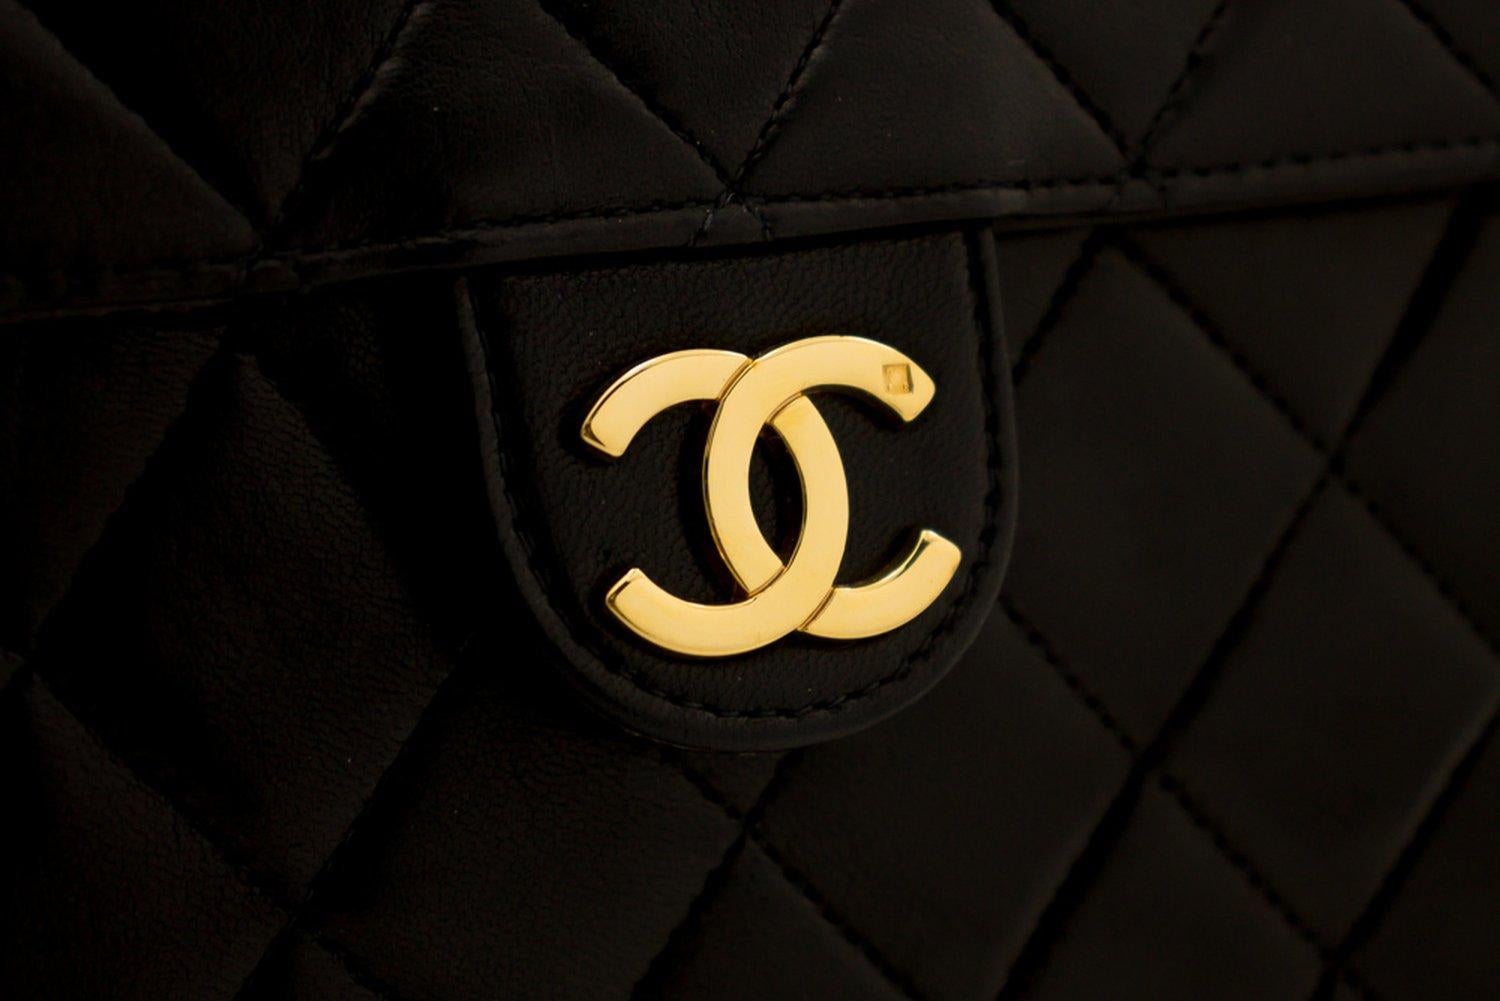 CHANEL Chain Shoulder Bag Black Clutch Flap Quilted Lambskin 8